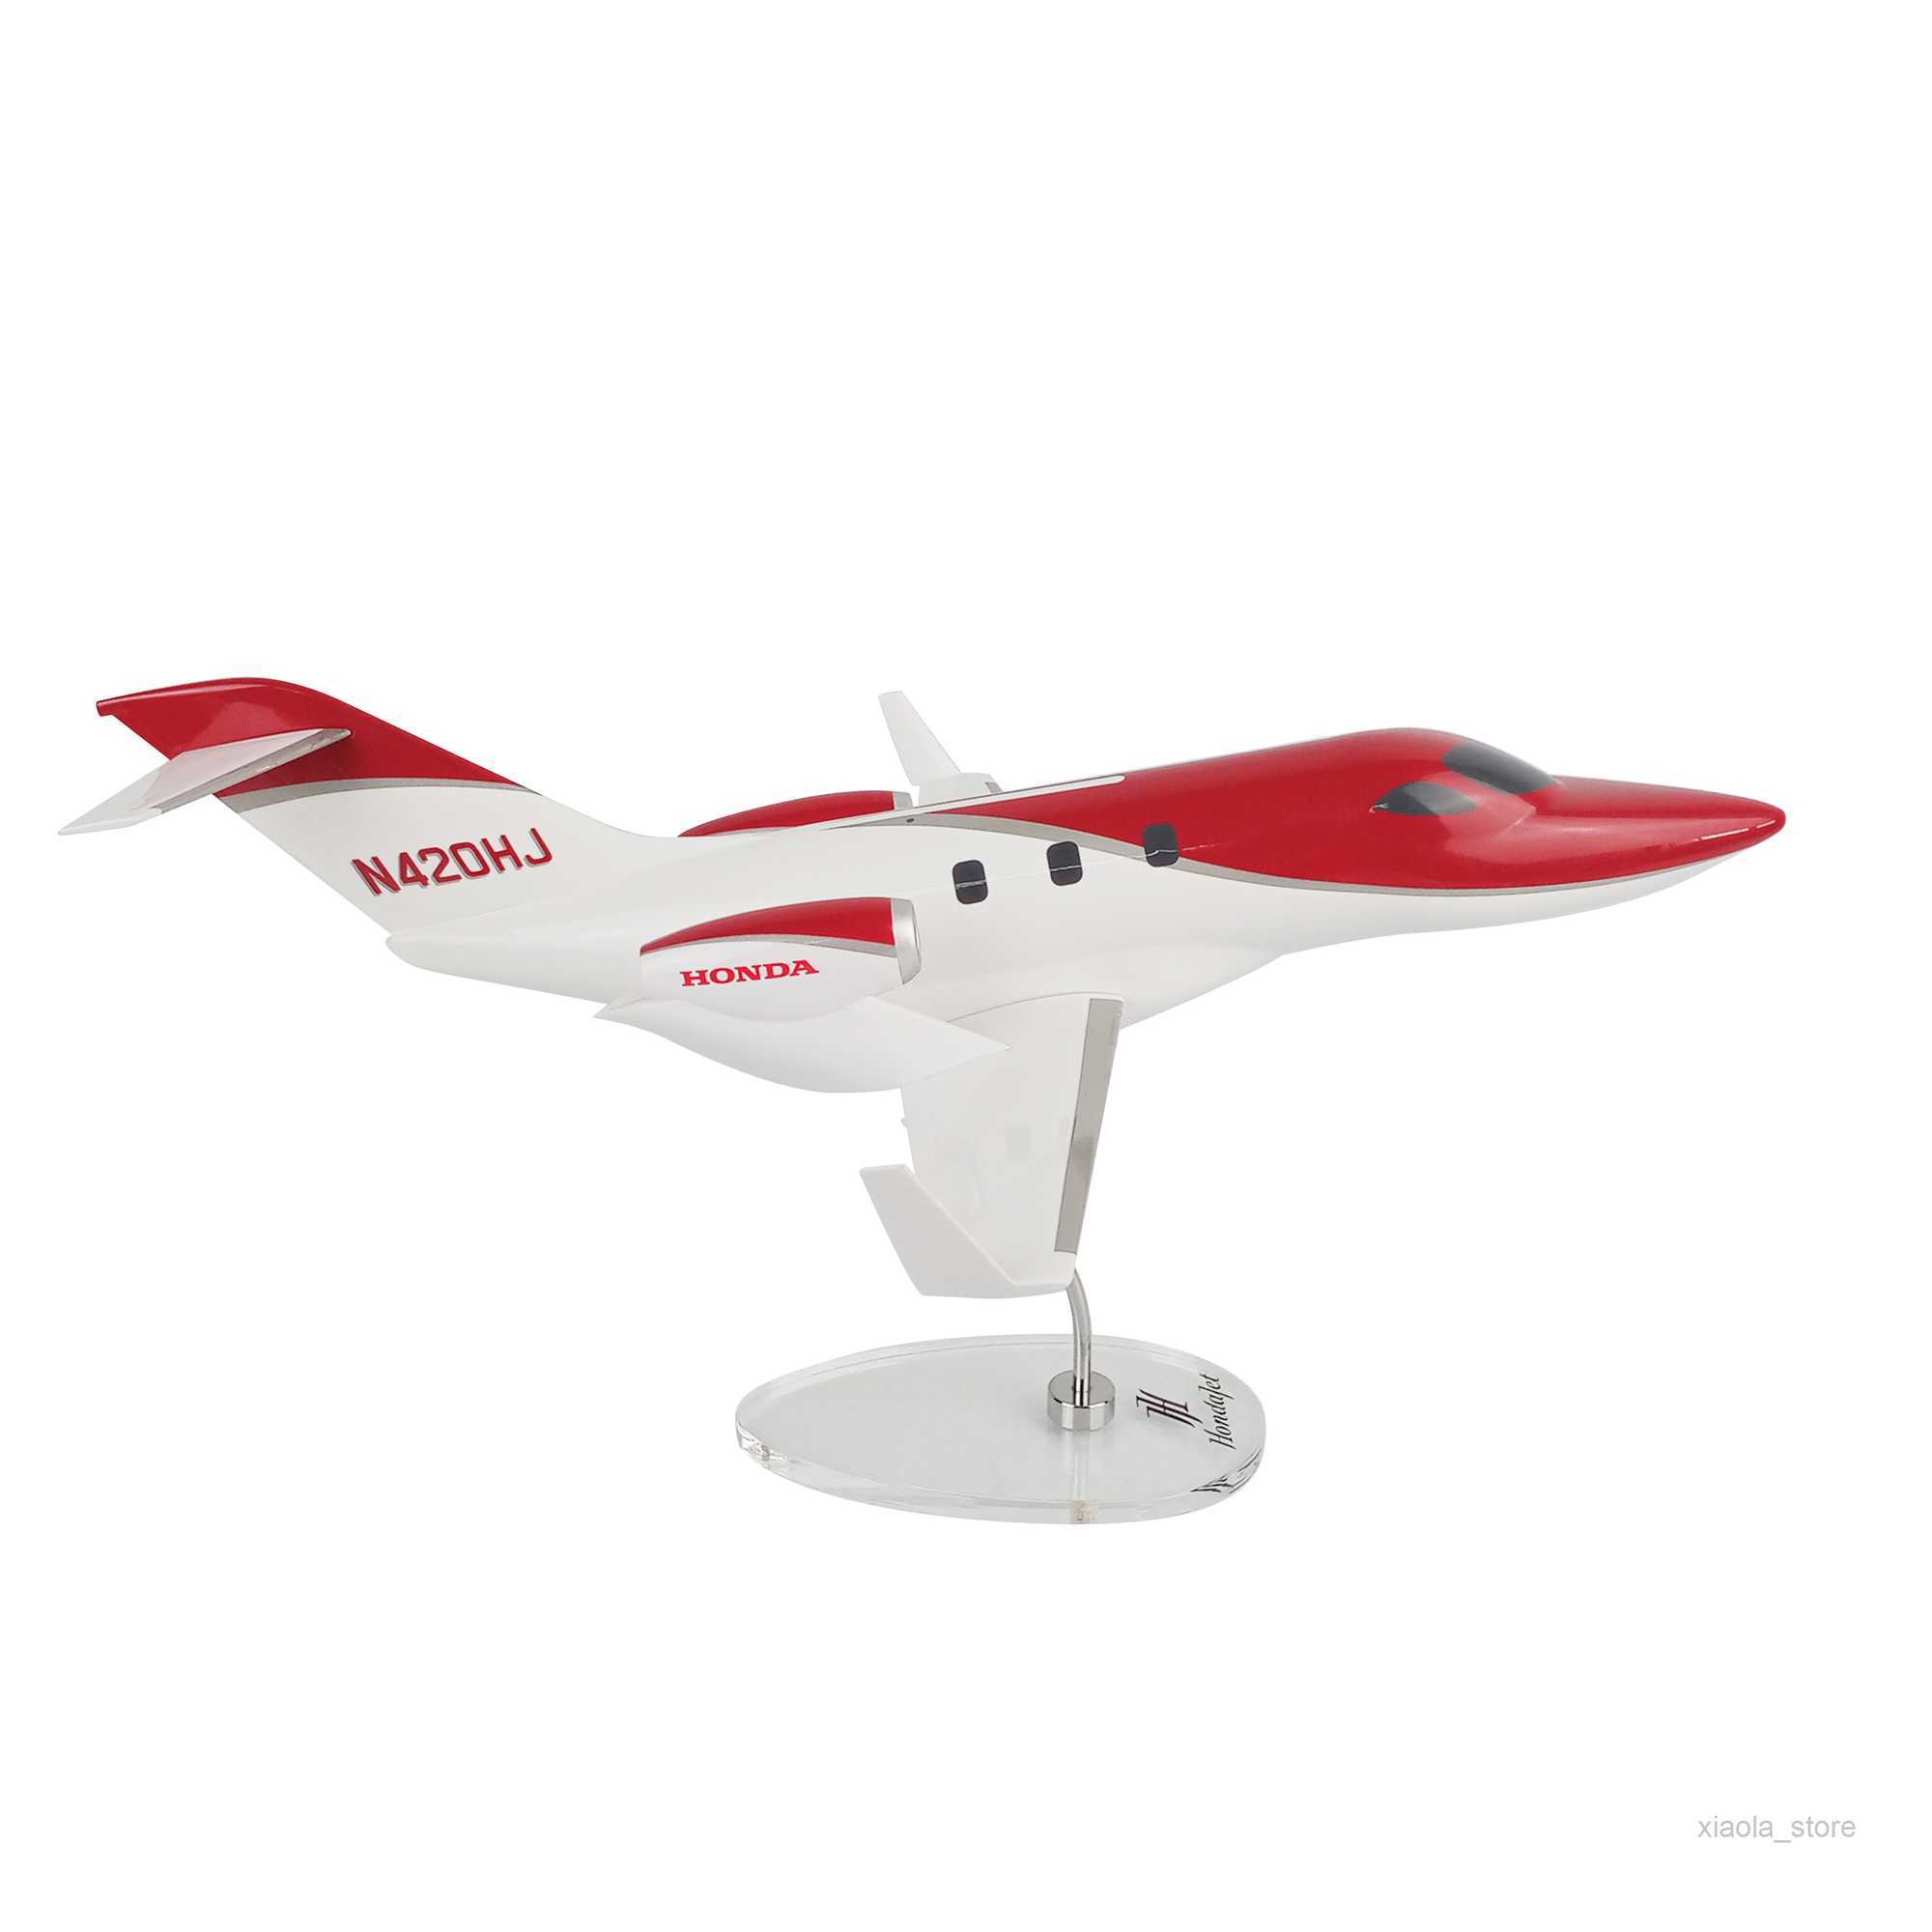 Aircraft Modle HondaJet Red 1 32 Scale Business Jet Plane Display Collection Aircraft ModelHKD230701